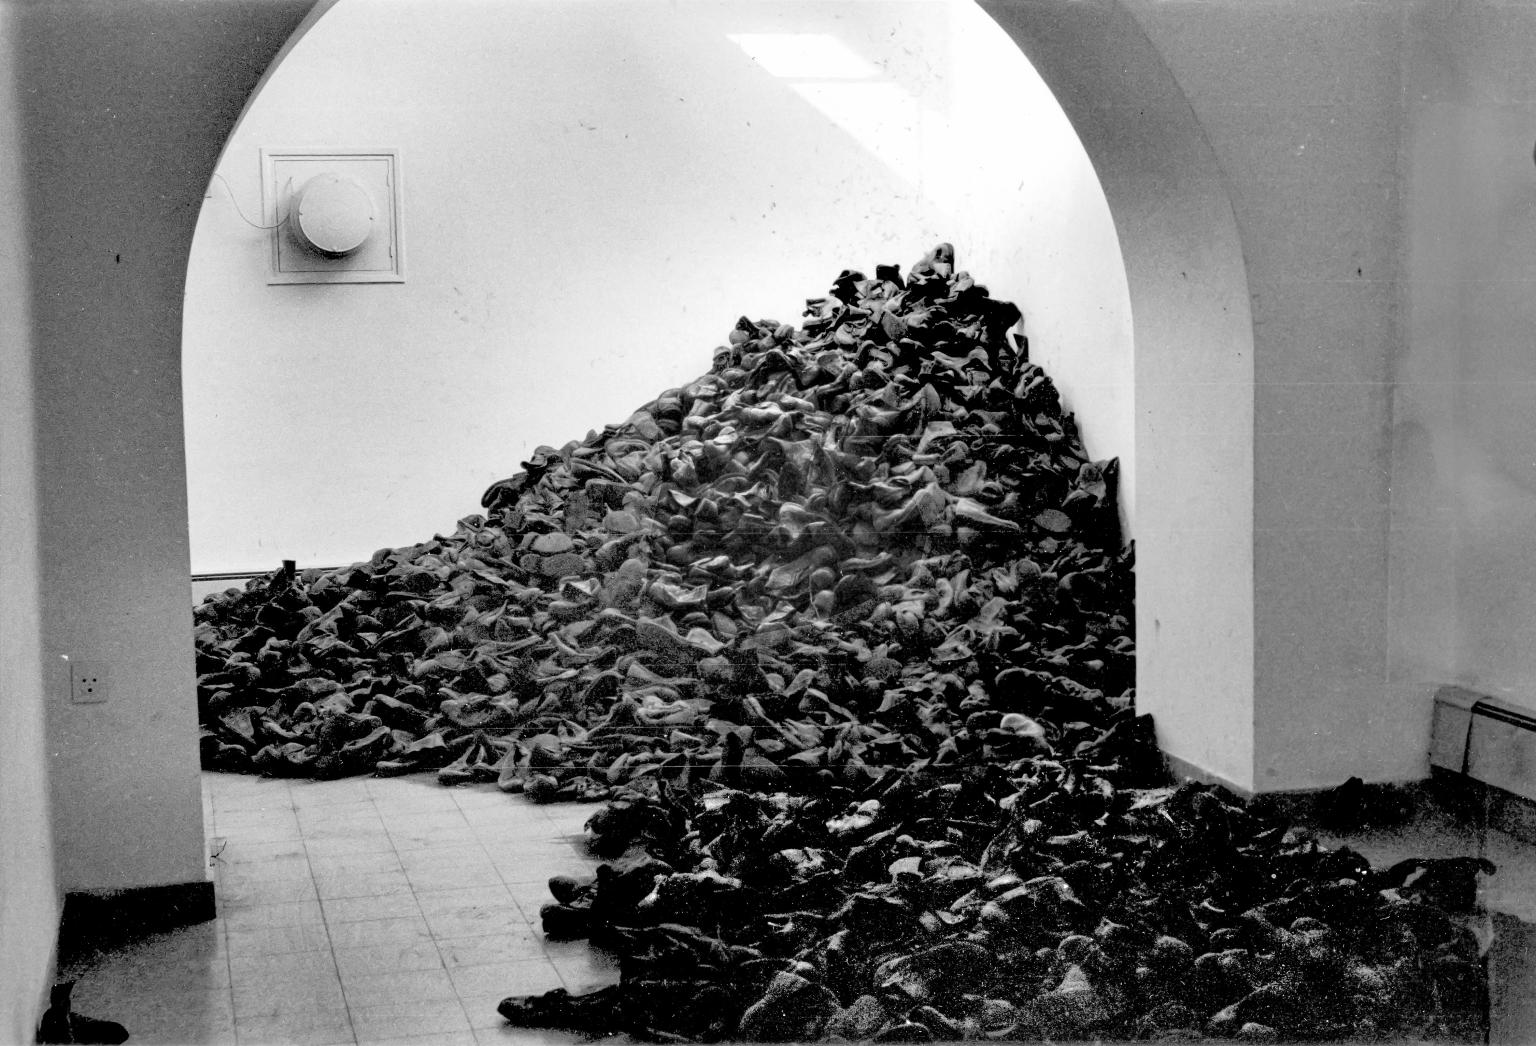 Art installation of large number of boots piled between two rooms.